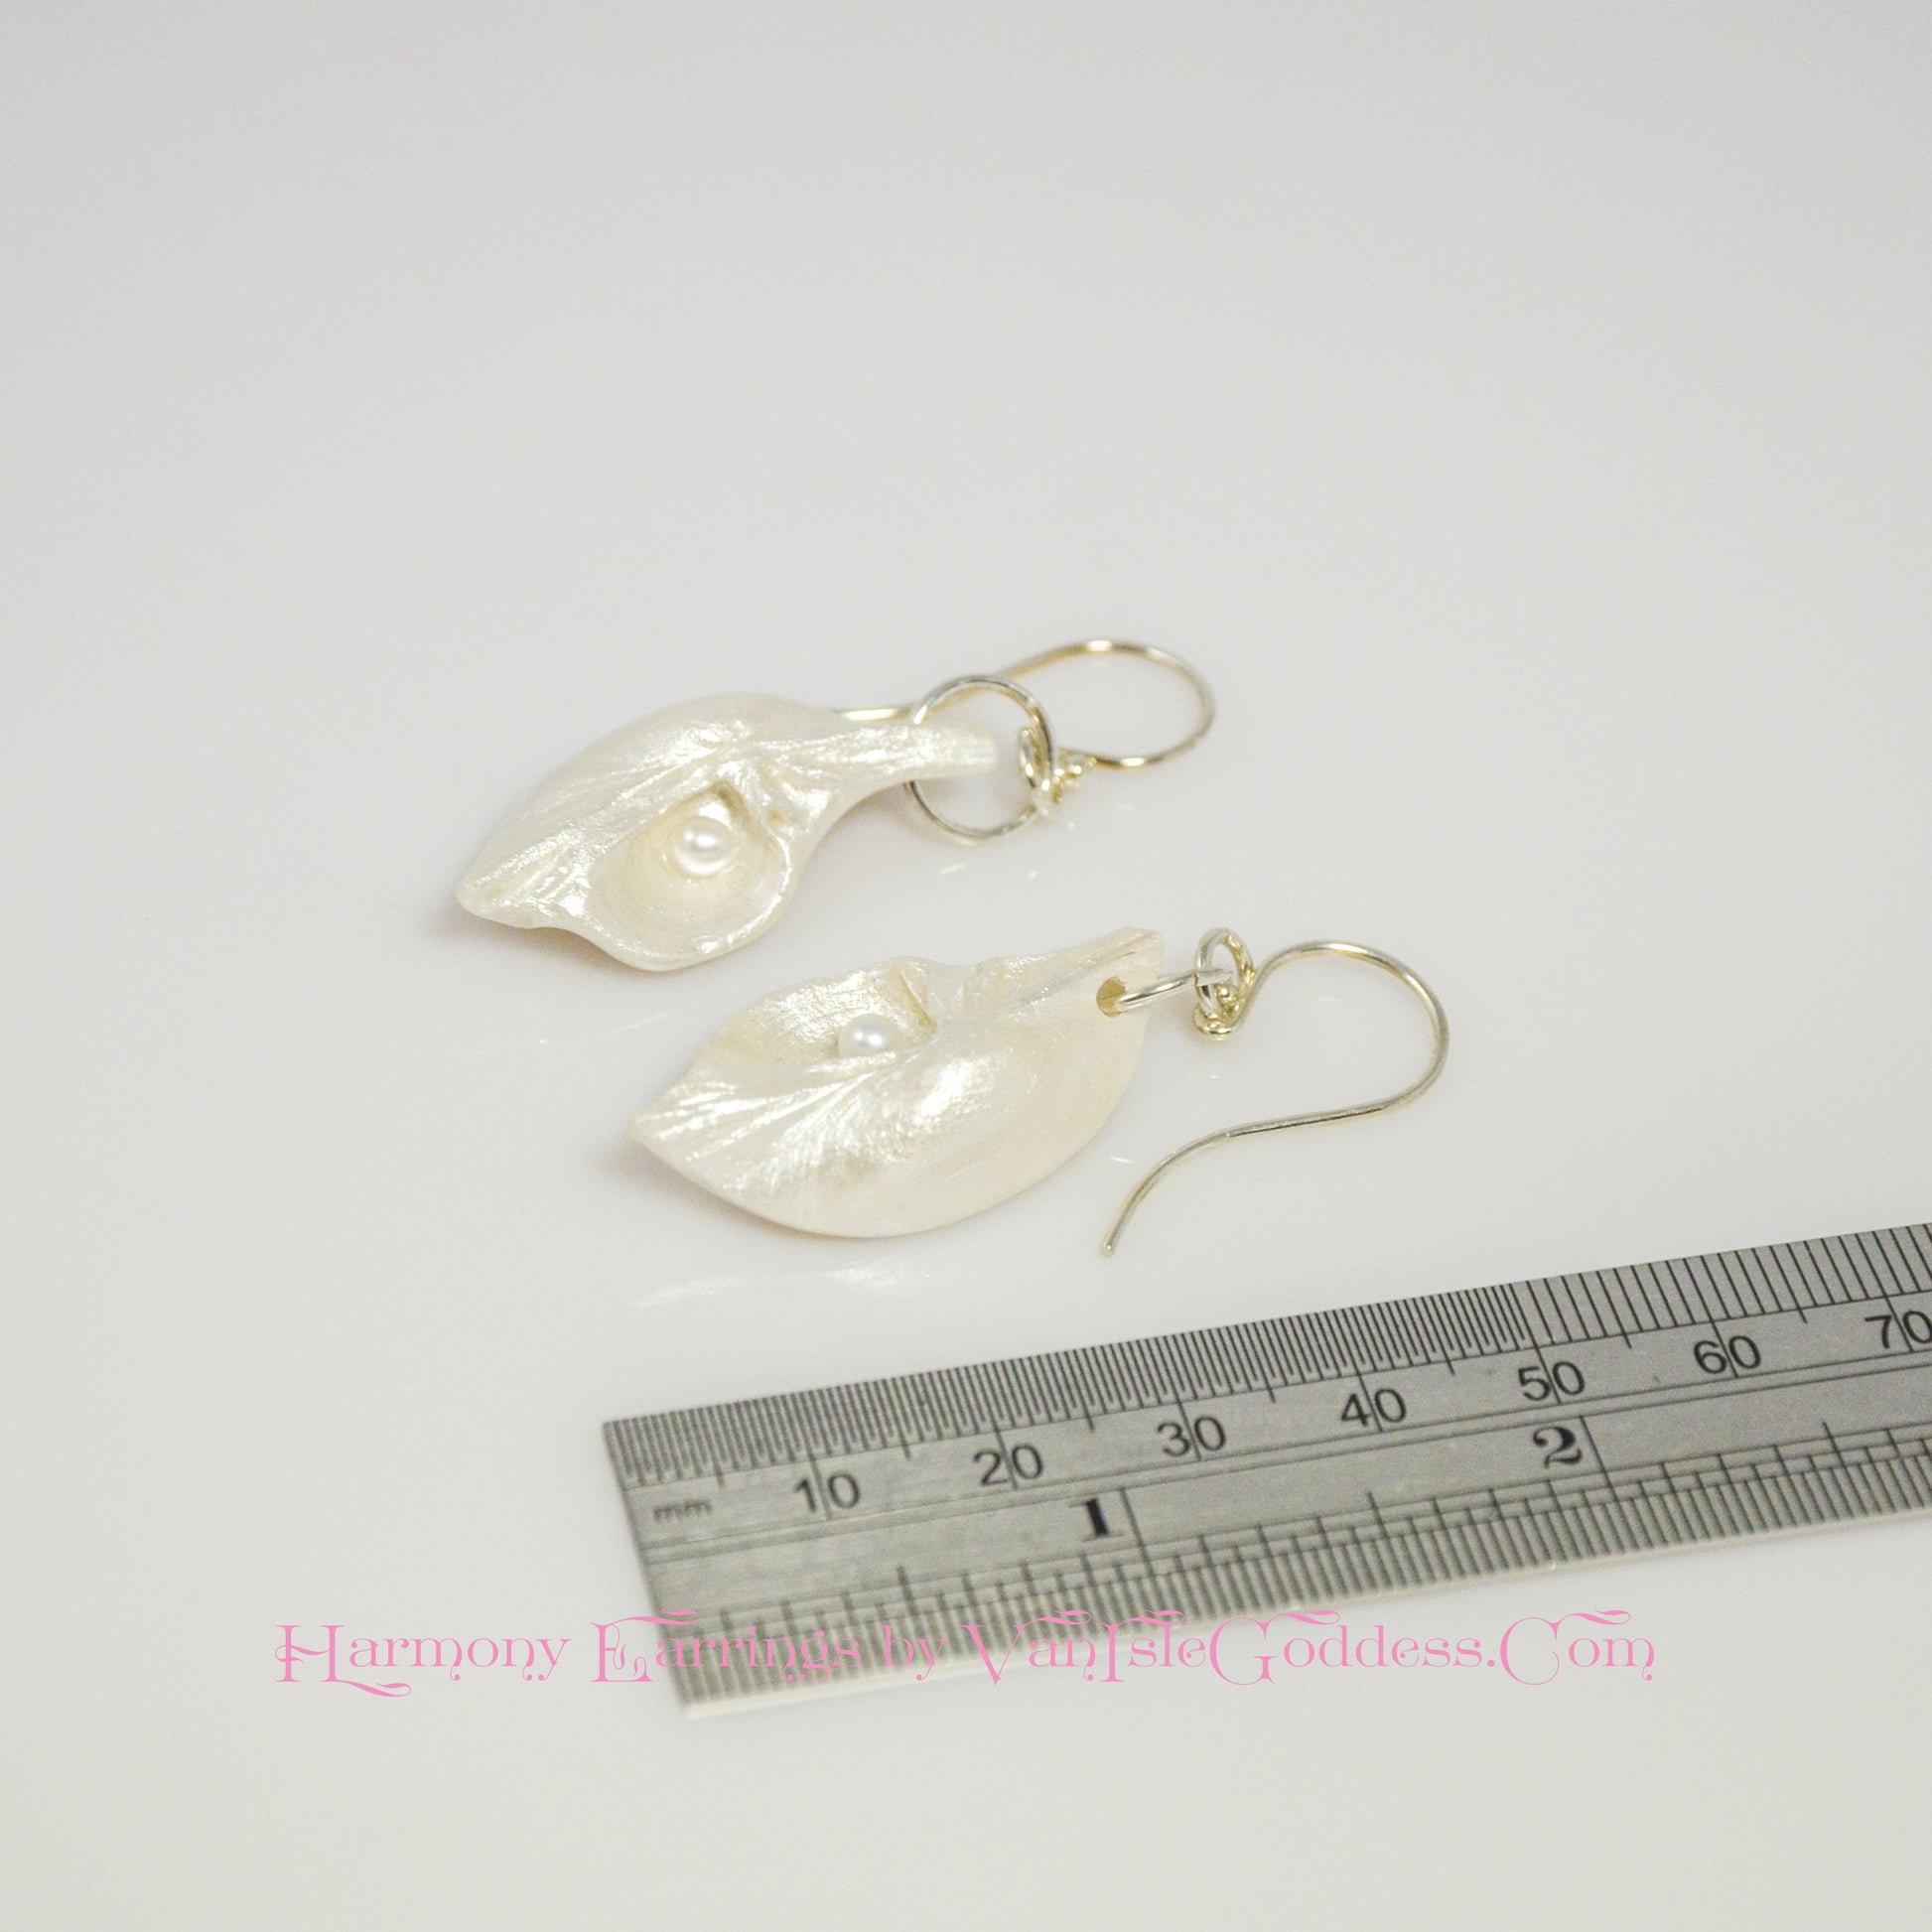 Harmony Earrings made of natural seashells and real freshwater pearls. The earring are shown along a ruler so the viewer can see the length of the earrings.